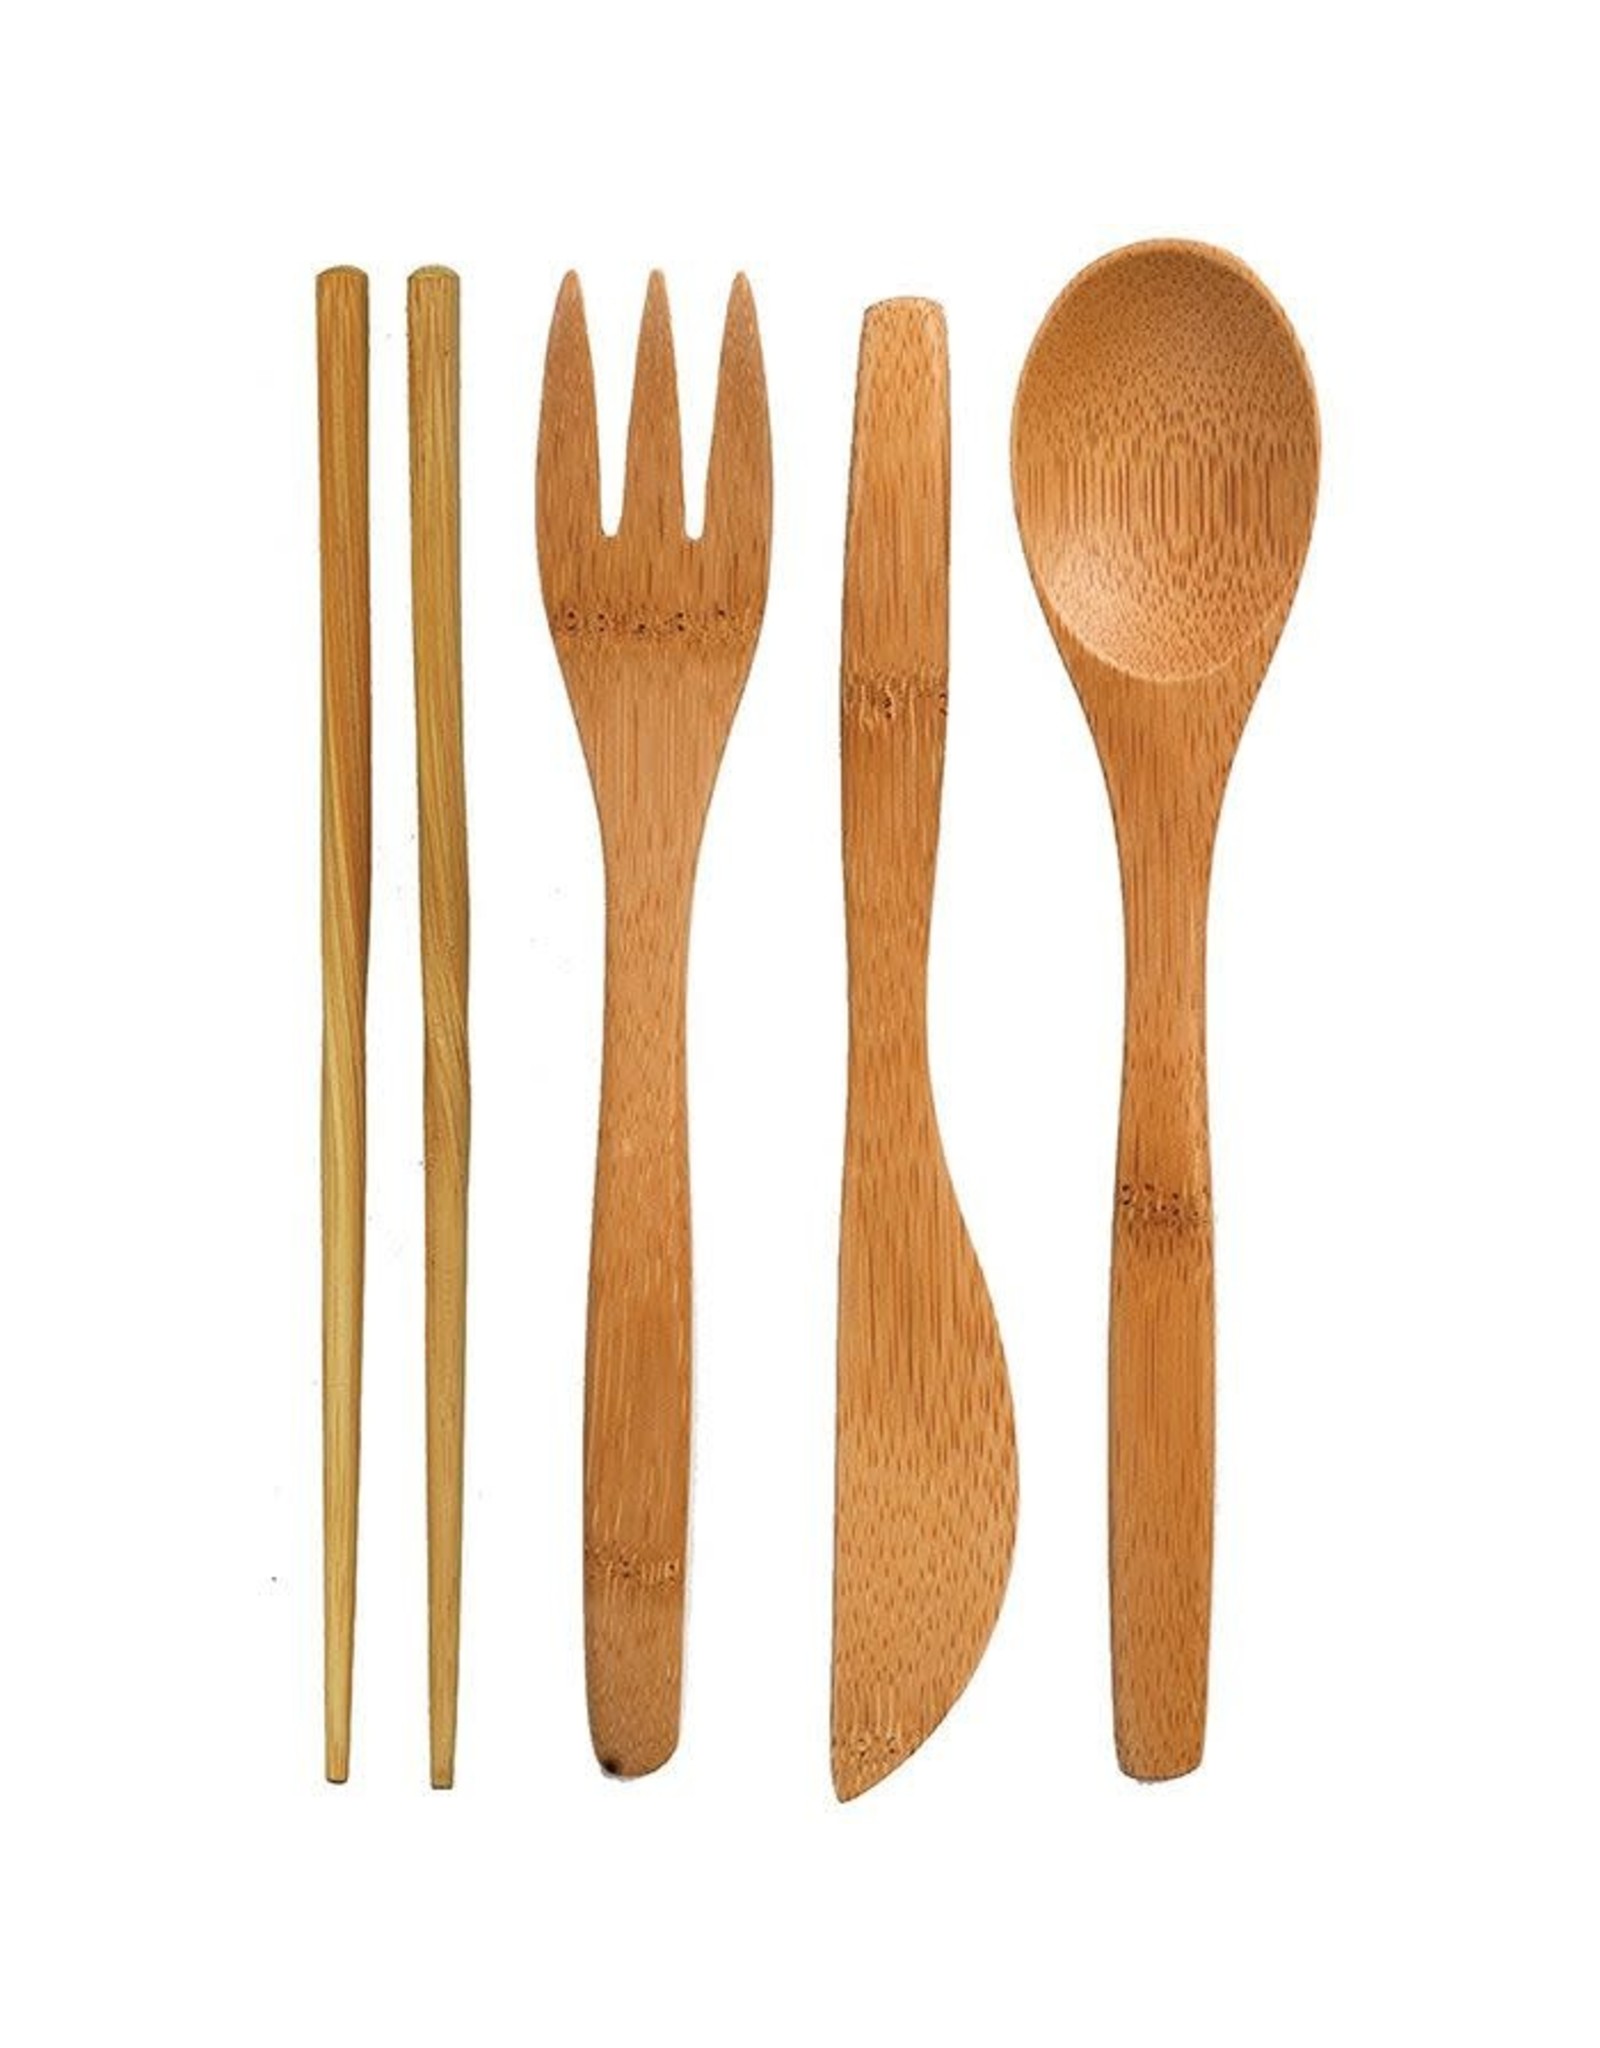 To-Go Ware Bamboo Utensil Set 4 pc. Agave